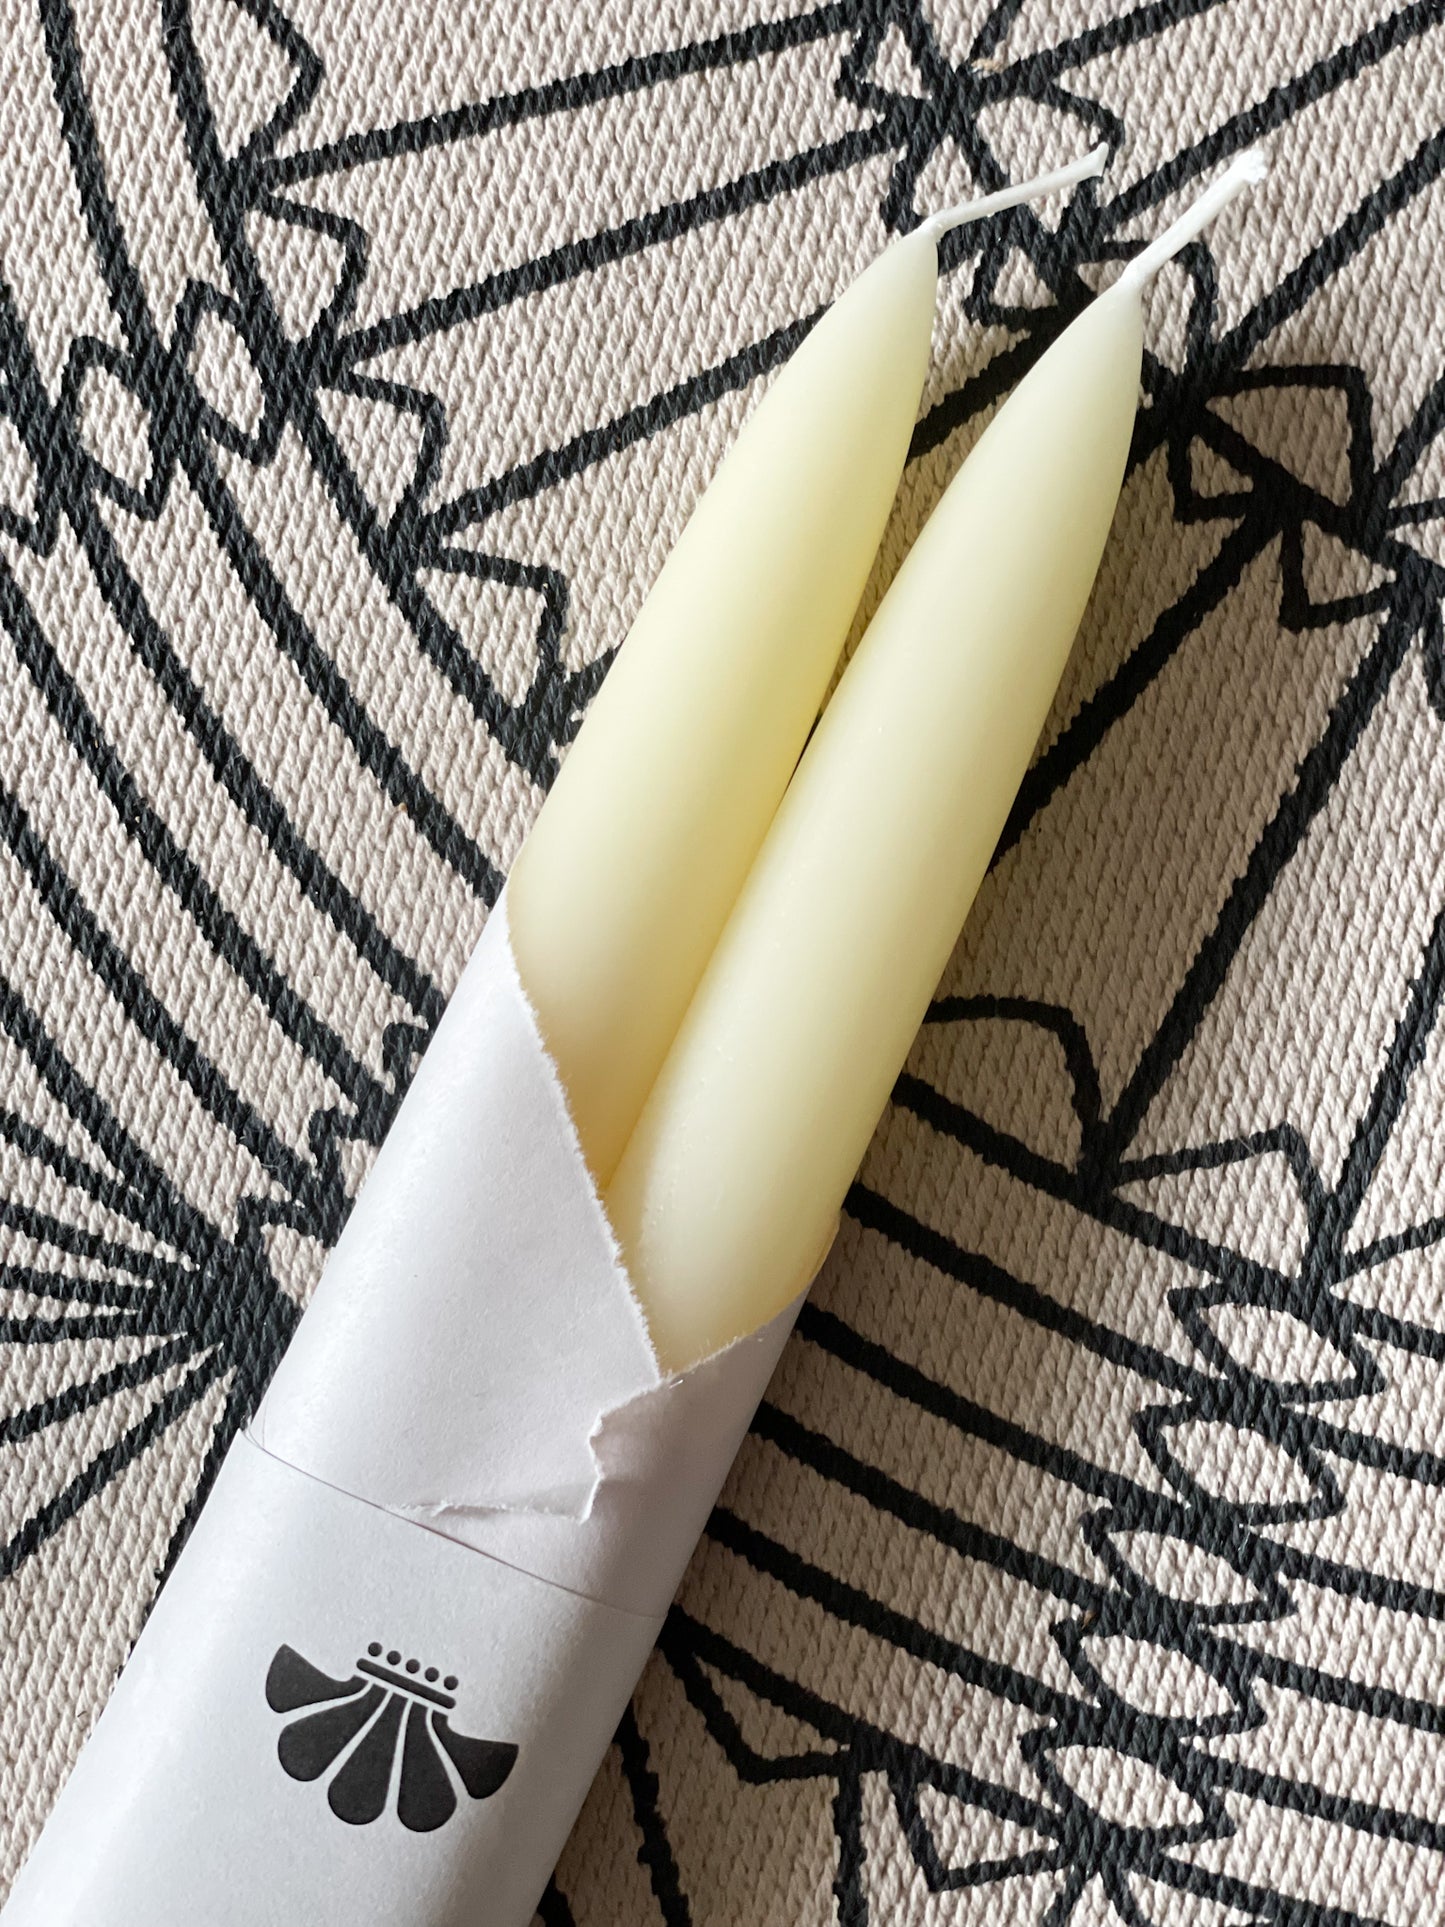 Ivory White 10" Taper 100% Beeswax Candles - 2-Pack